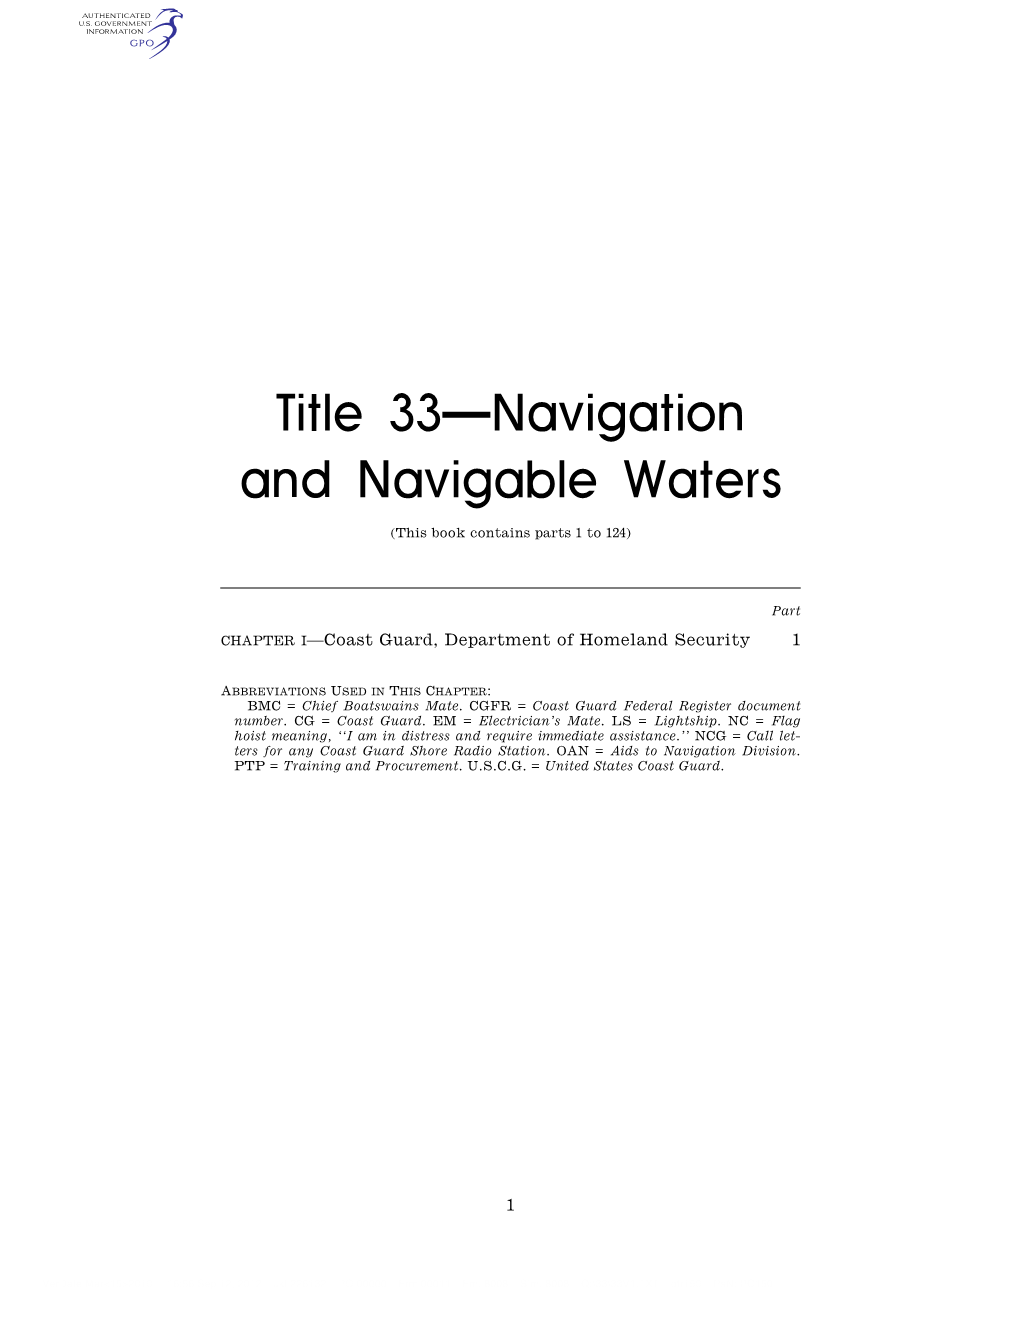 Title 33—Navigation and Navigable Waters